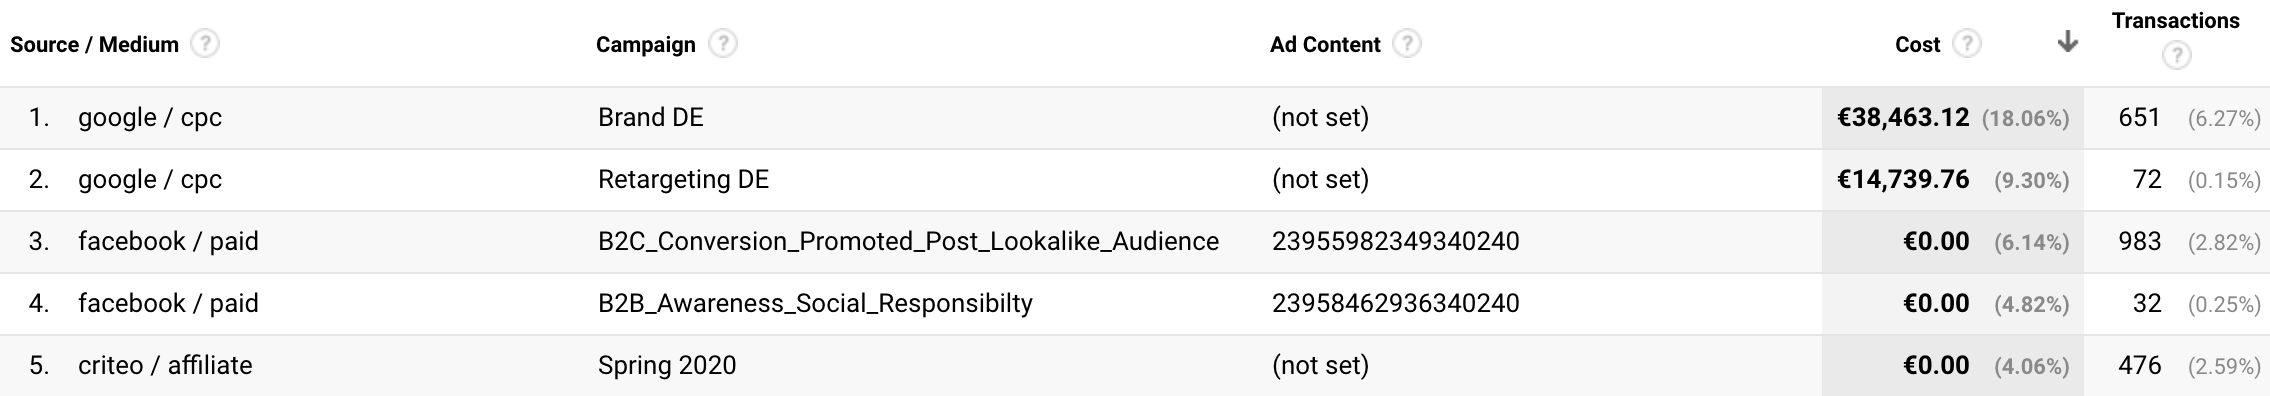 Campaign id now now available in Google Analytics